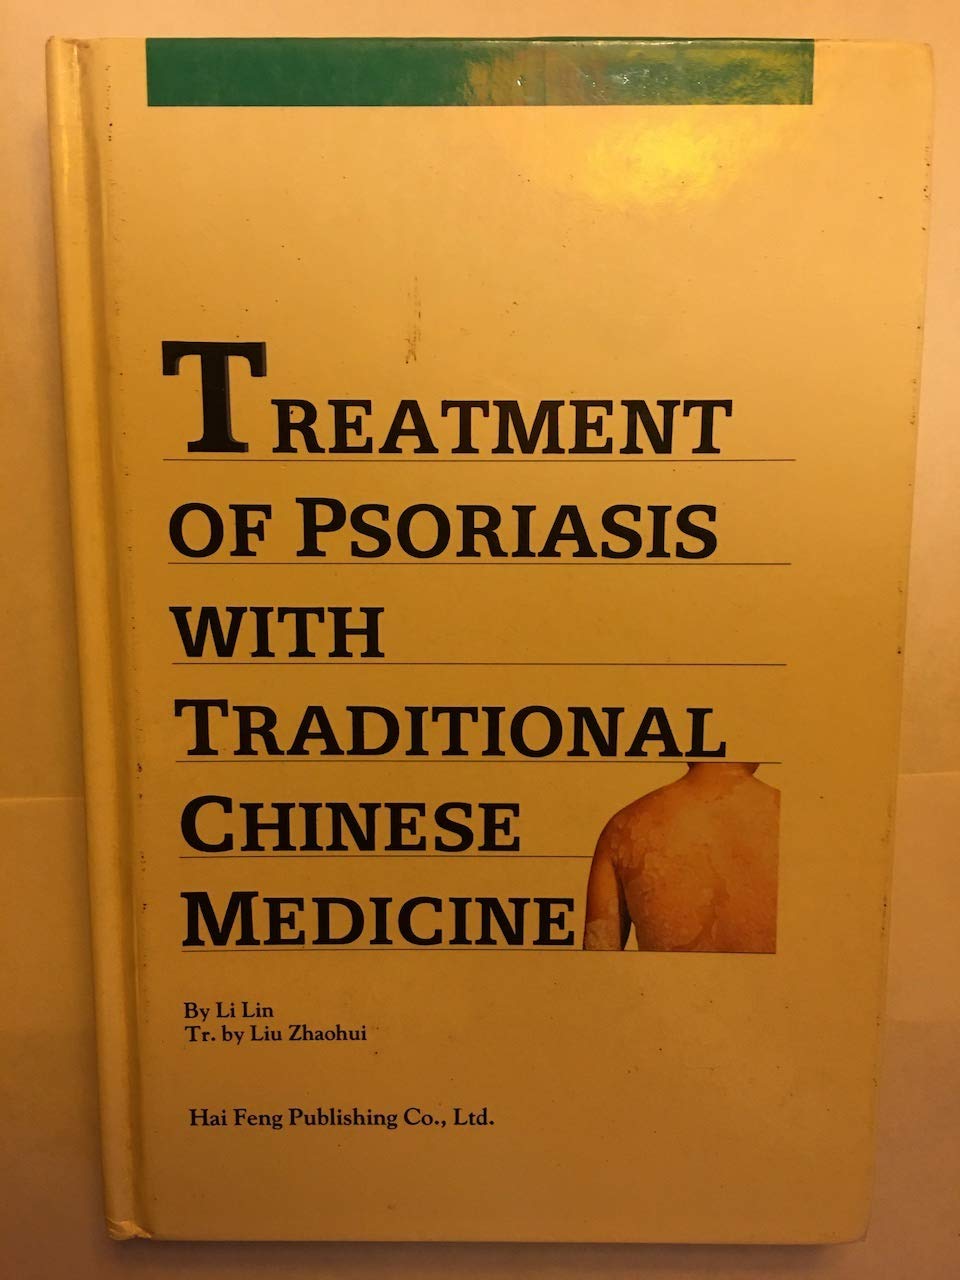 Treatment of psoriasis with traditional Chinese medicine